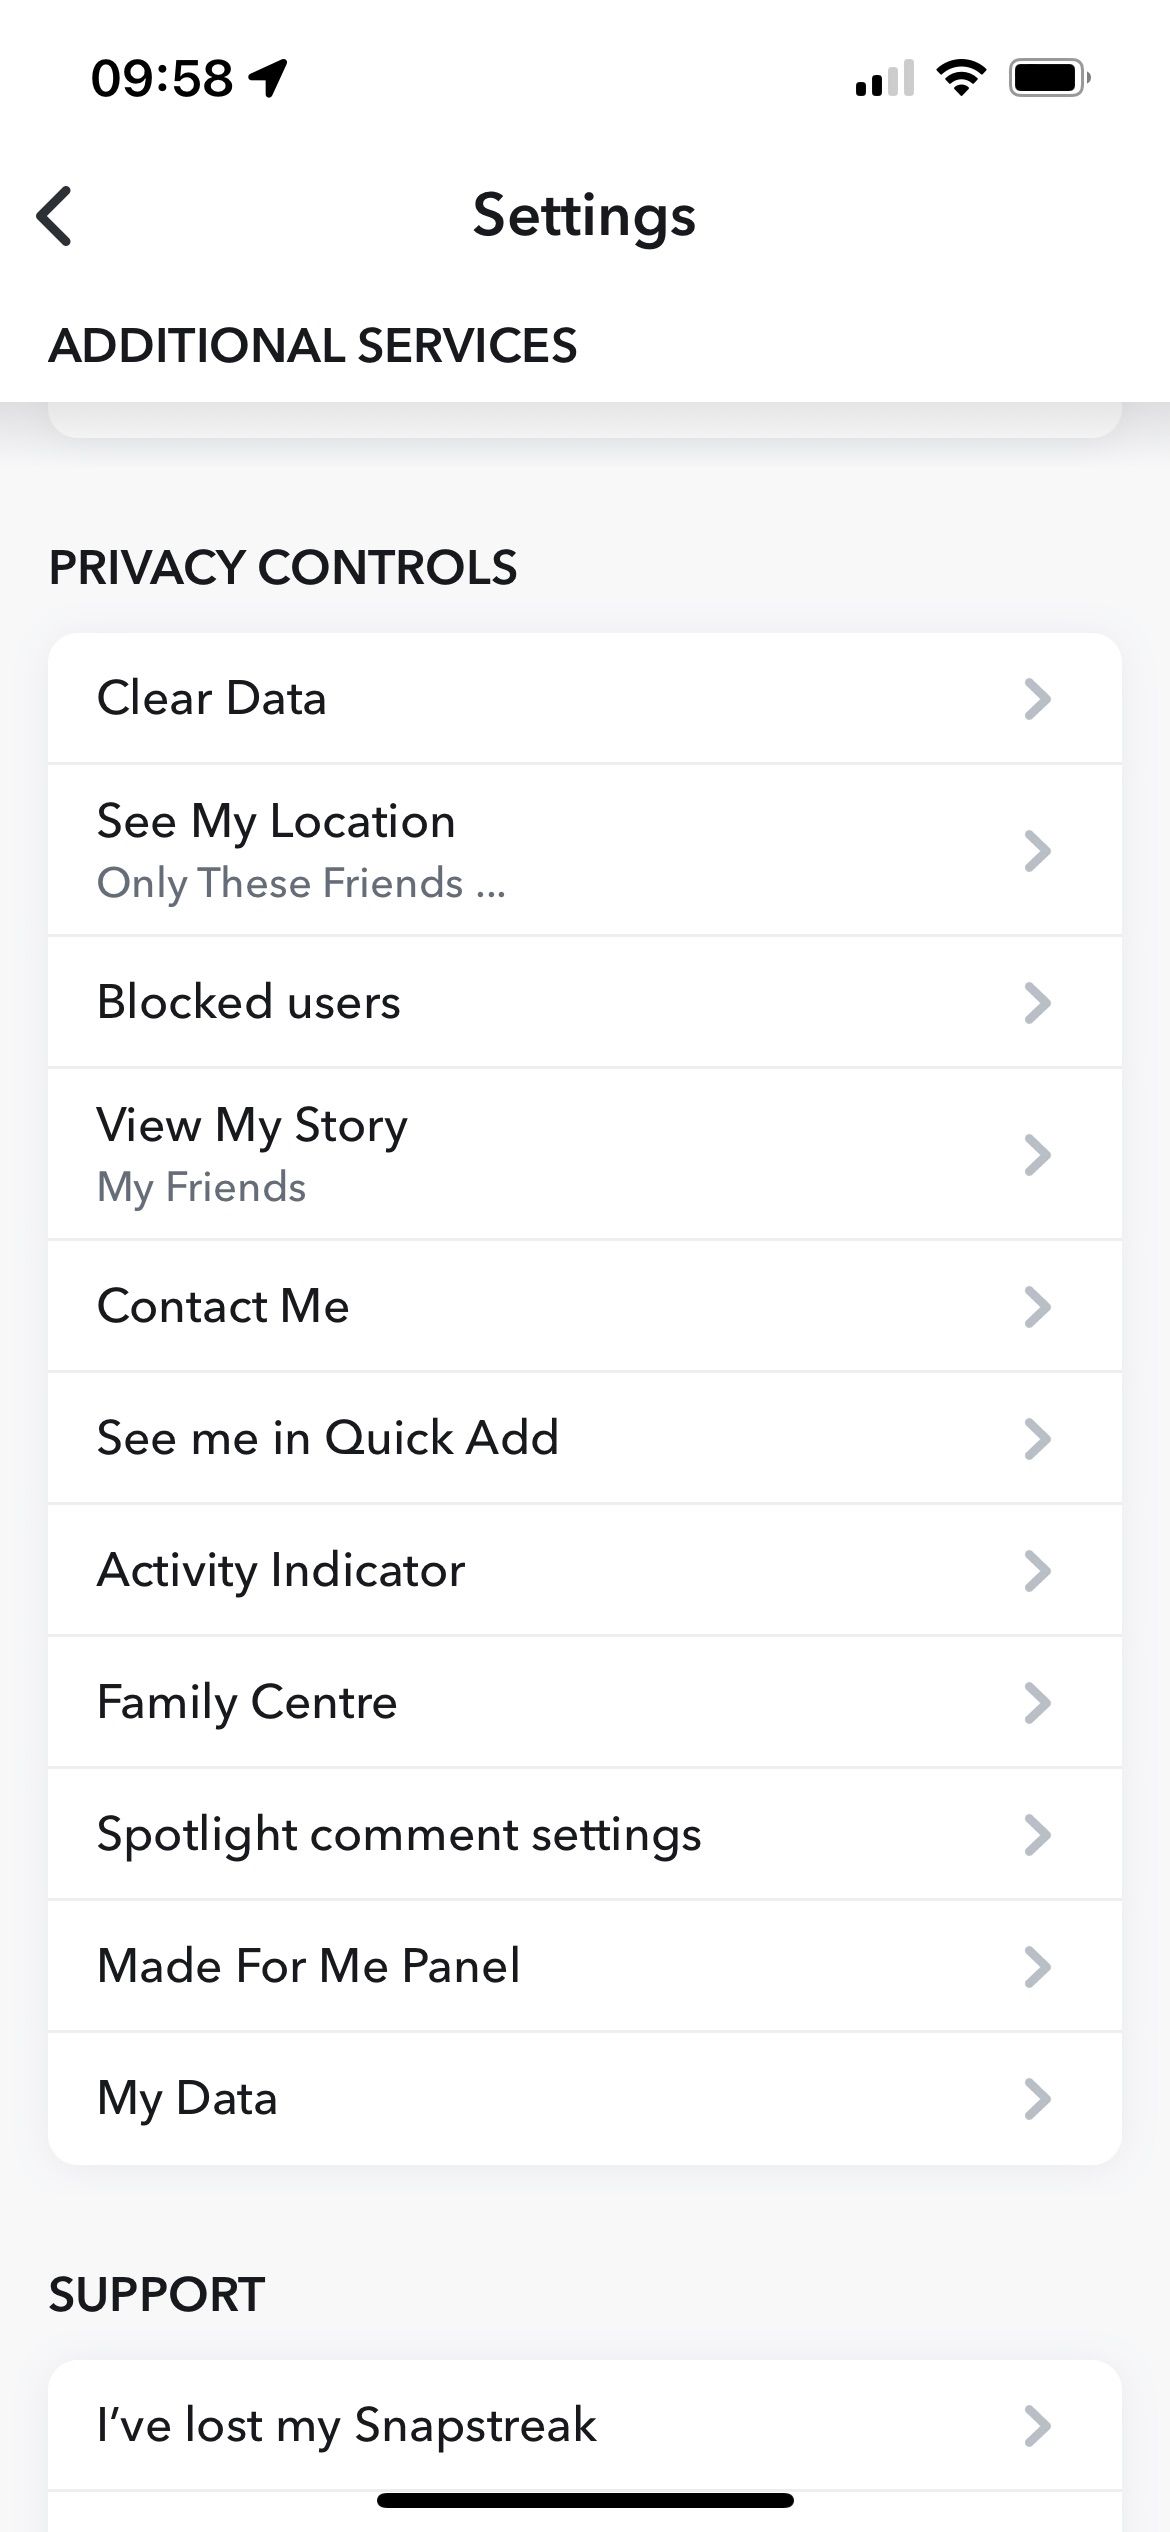 Snapchat's Privacy Controls section of its settings